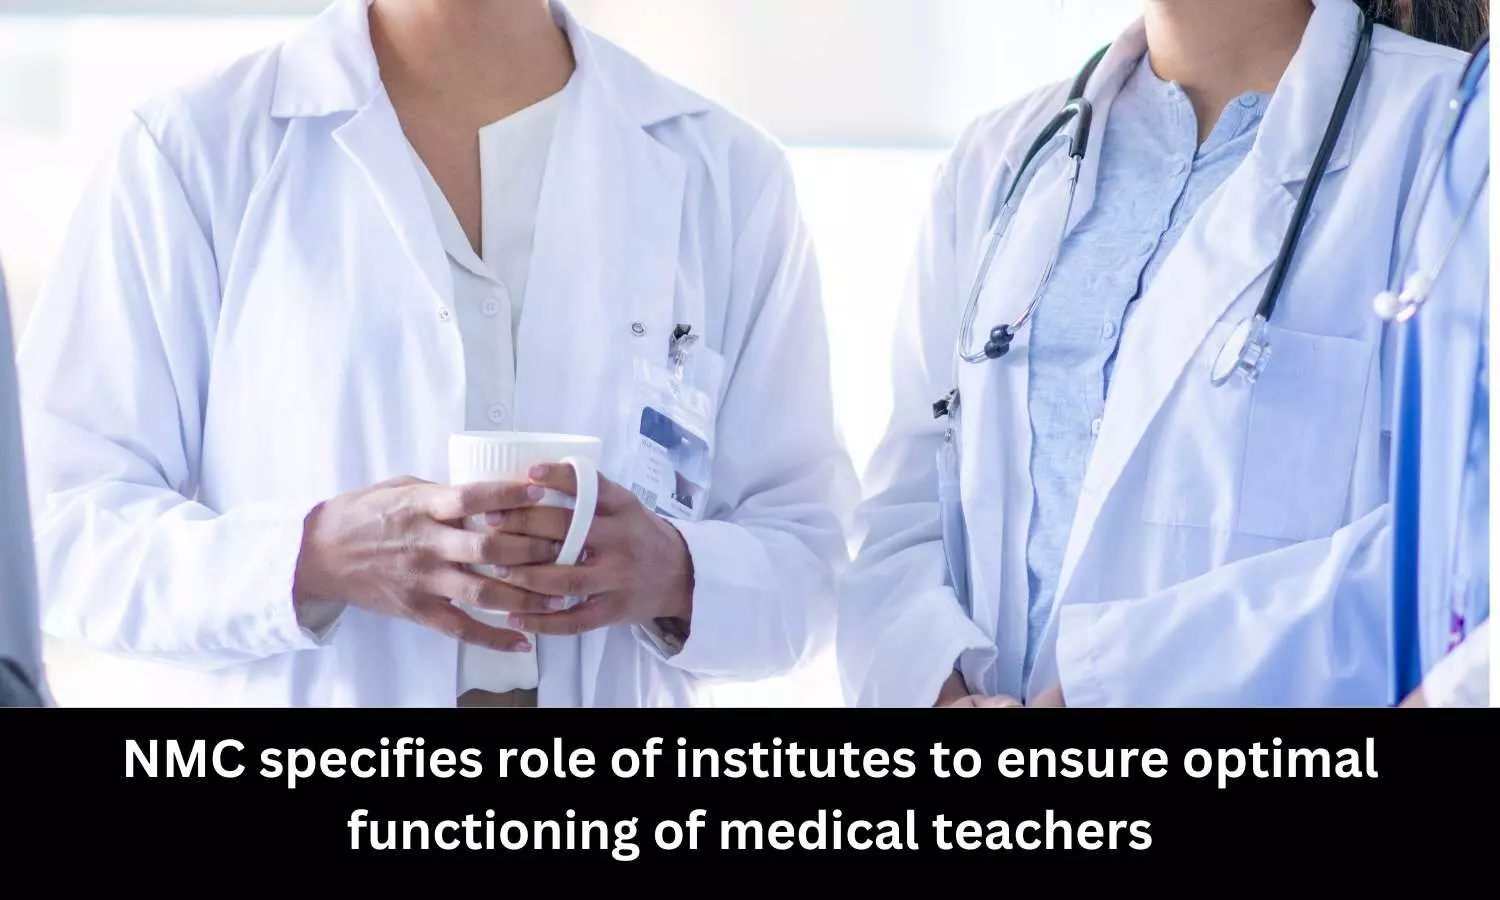 NMC specifies role of institutes to ensure optimal functioning of medical teachers